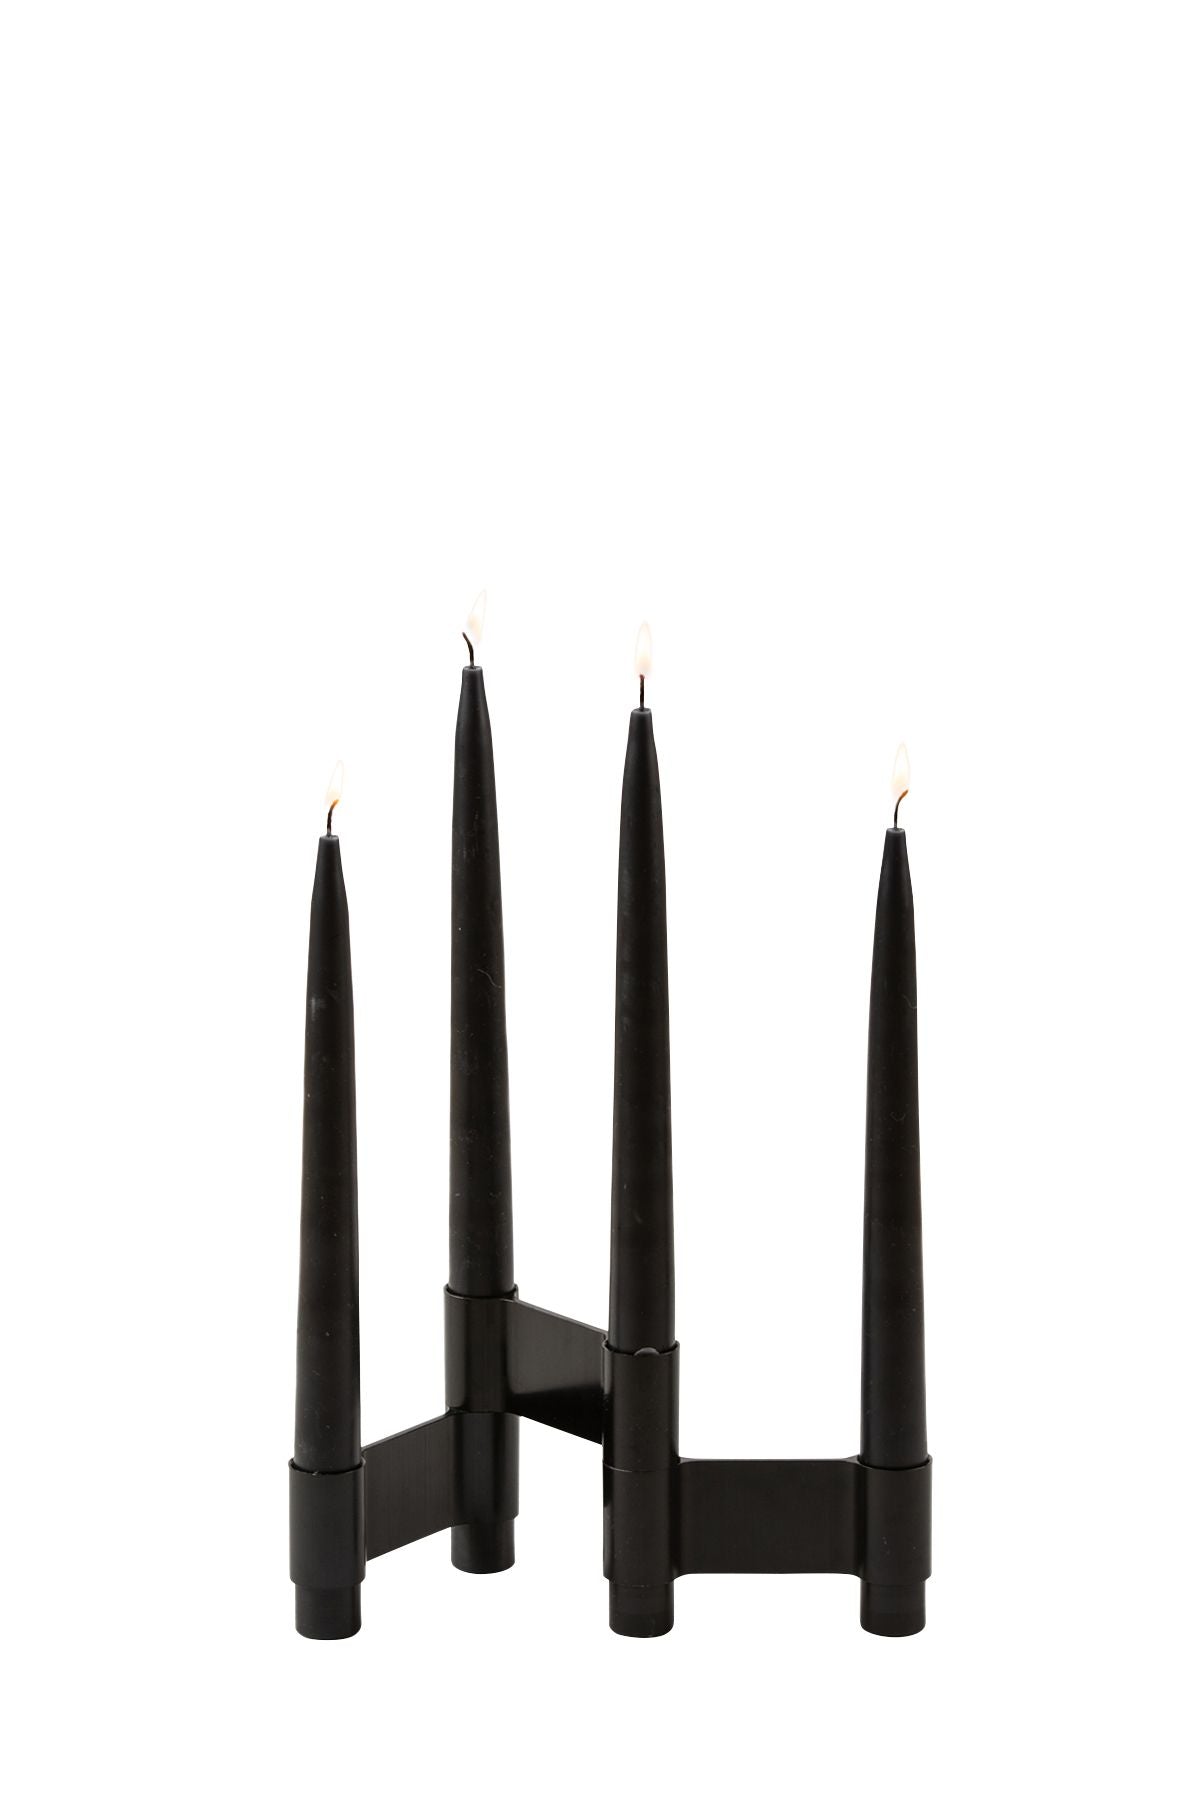 Studio About Link Candle Holder, Black Anodized